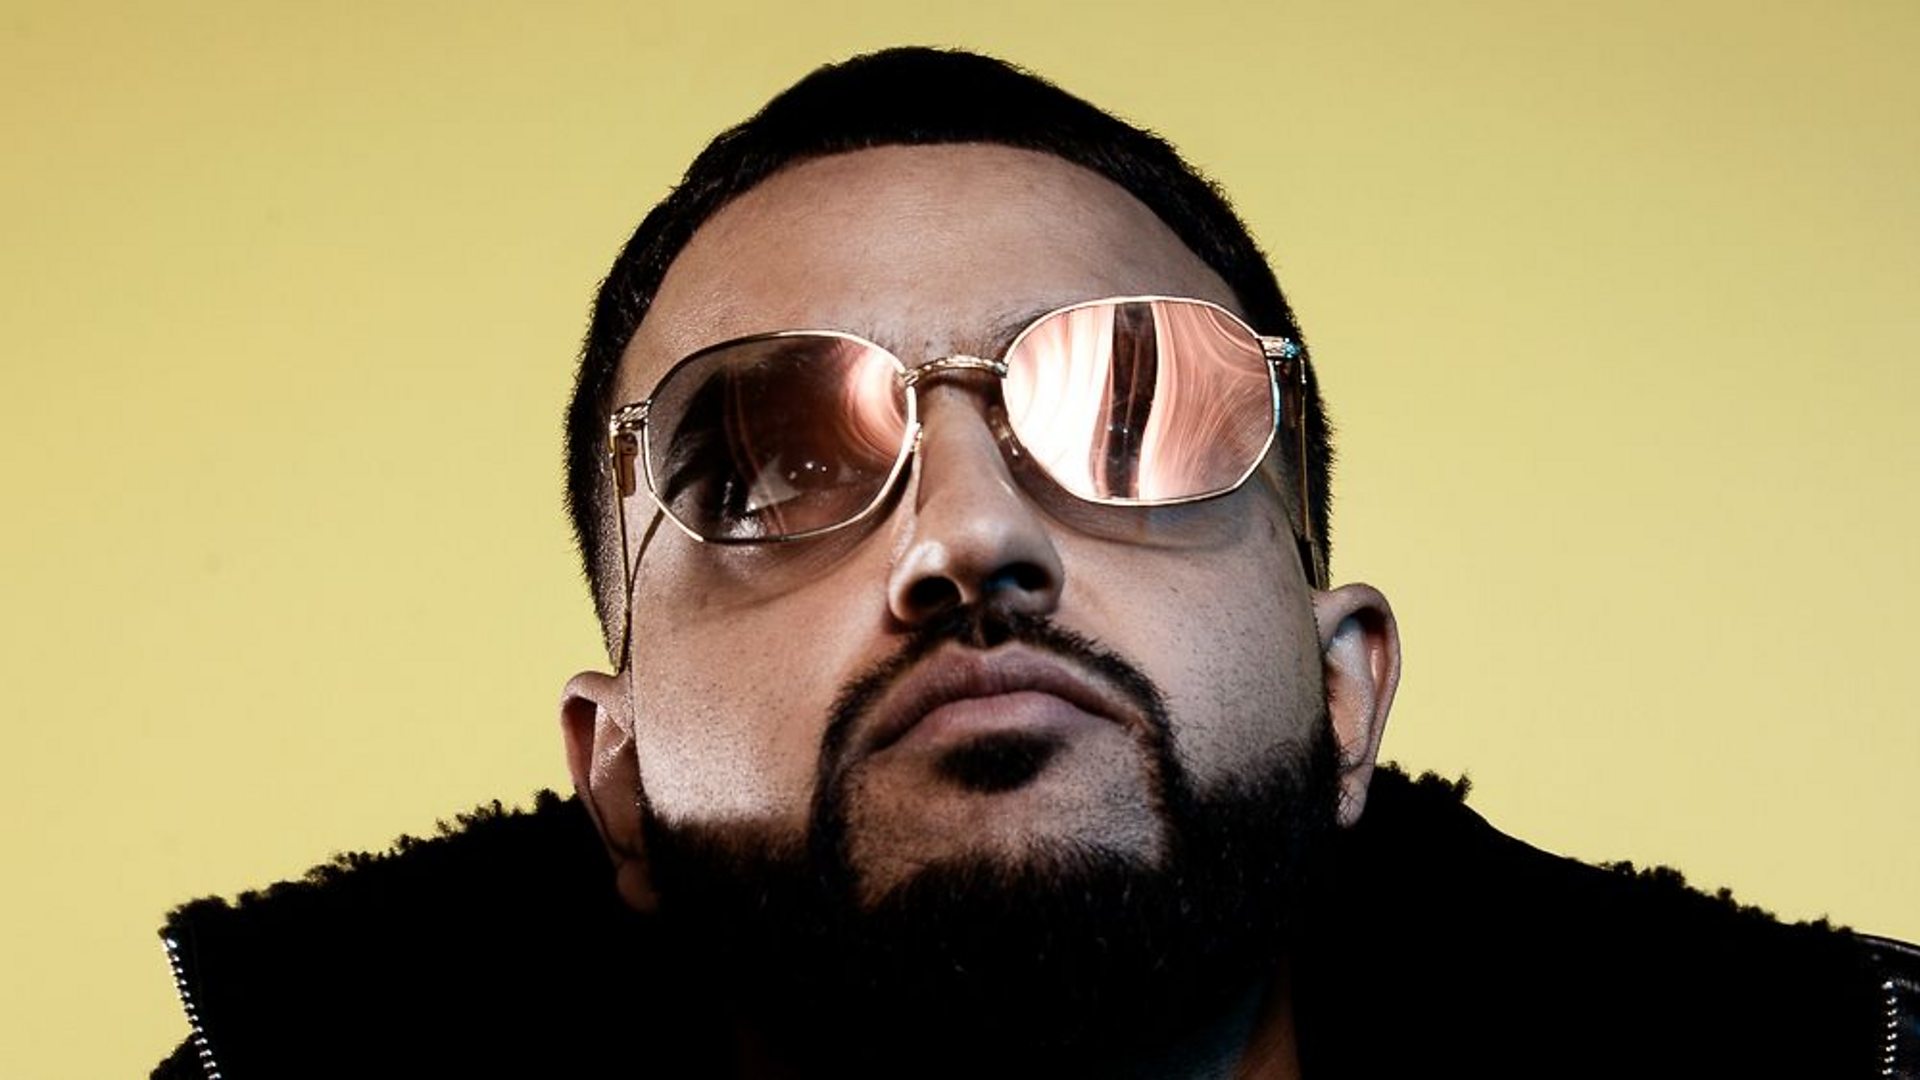 BBC - How Canadian-Indian rapper Nav topped the charts in the United States